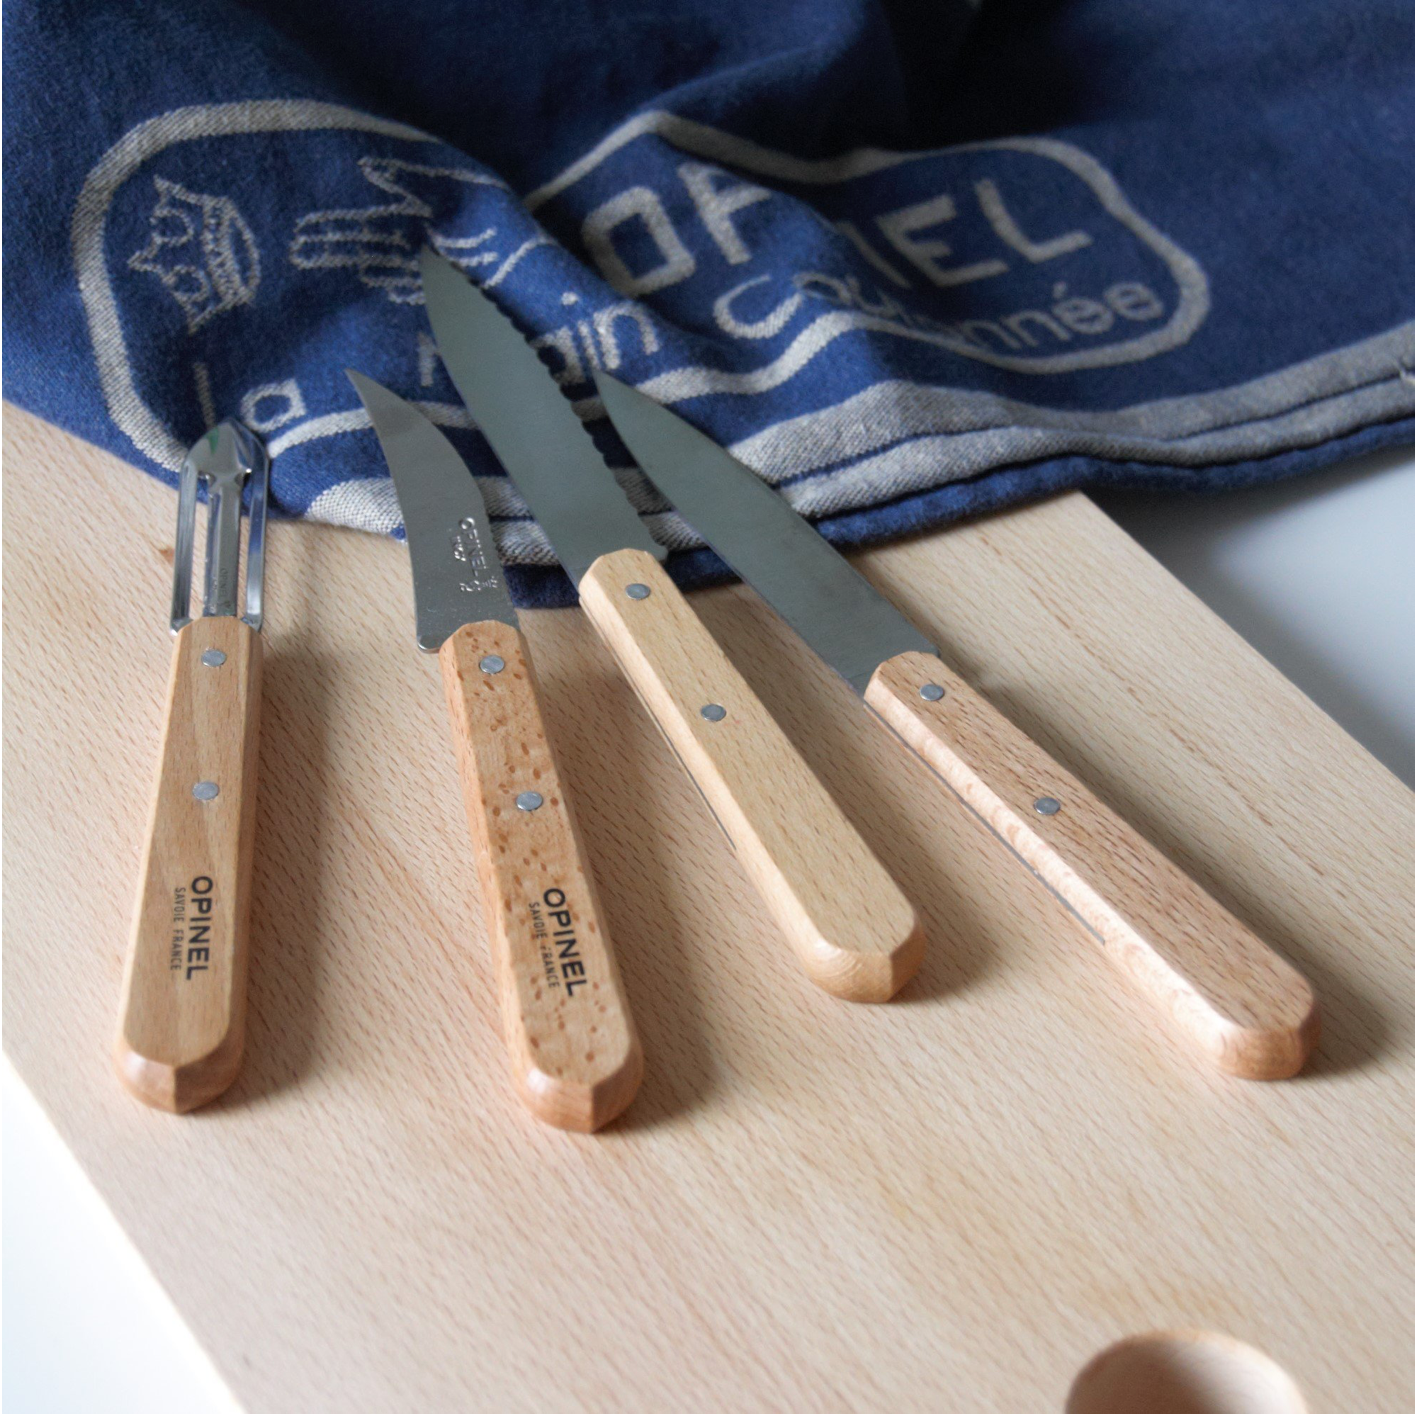 OPINEL ESSENTIAL SMALL KITCHEN KNIFE SET - NATURAL – THE MORE THE HAPPIER